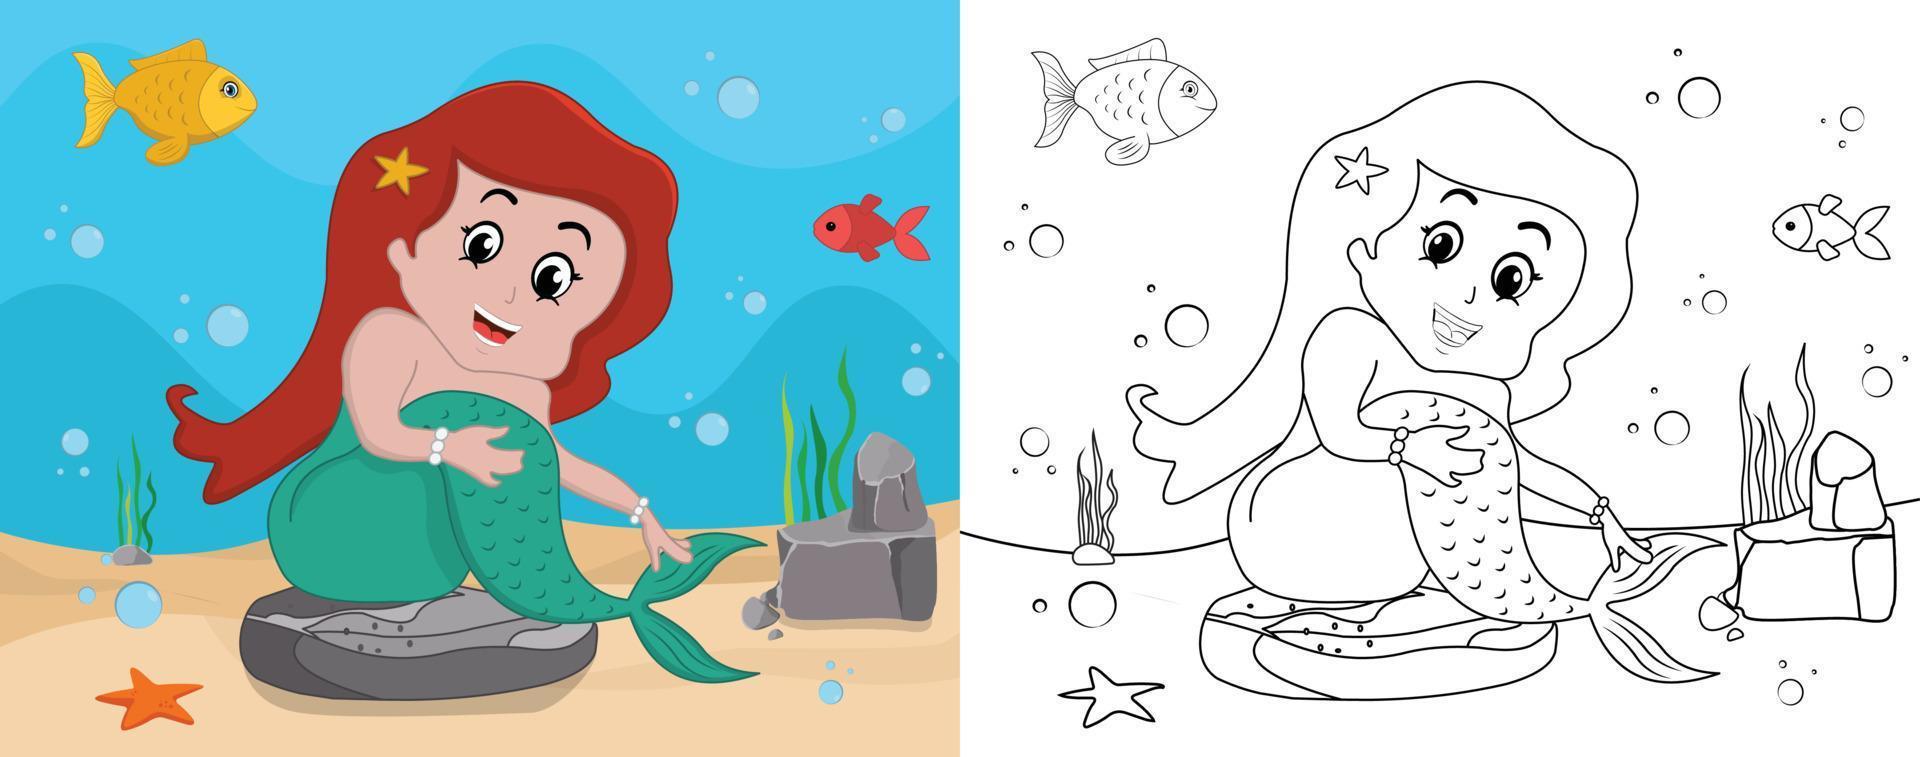 Cartoon mermaid coloring page no 02 kids activity page with line art vector illustration